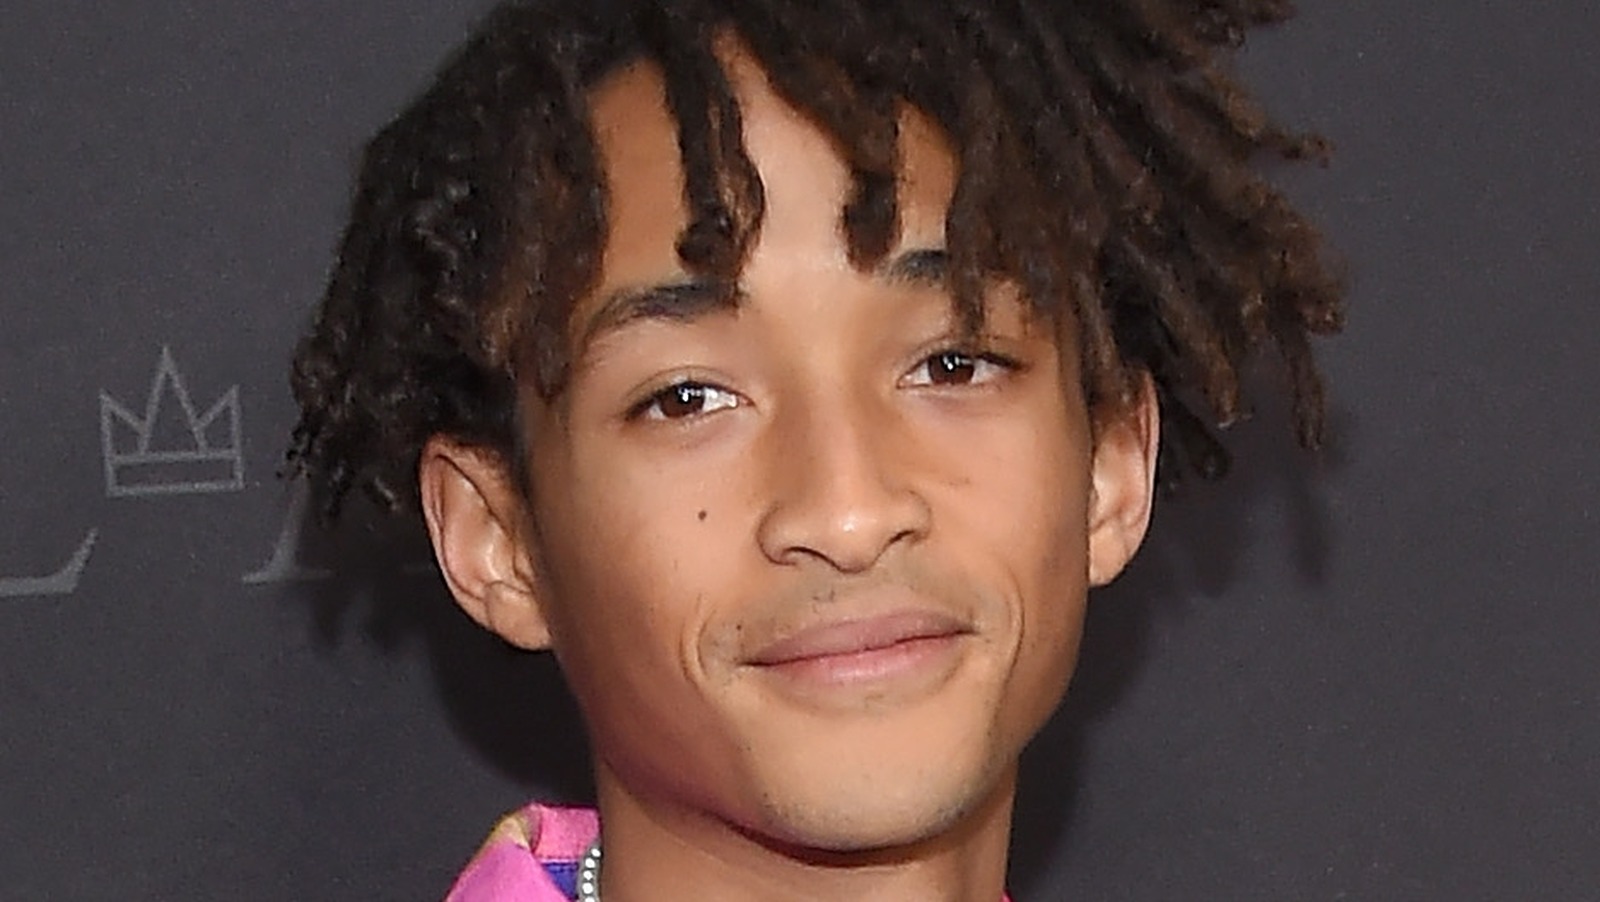 Jaden Smith Shows Off His Muscles After Committing to Gaining Weight